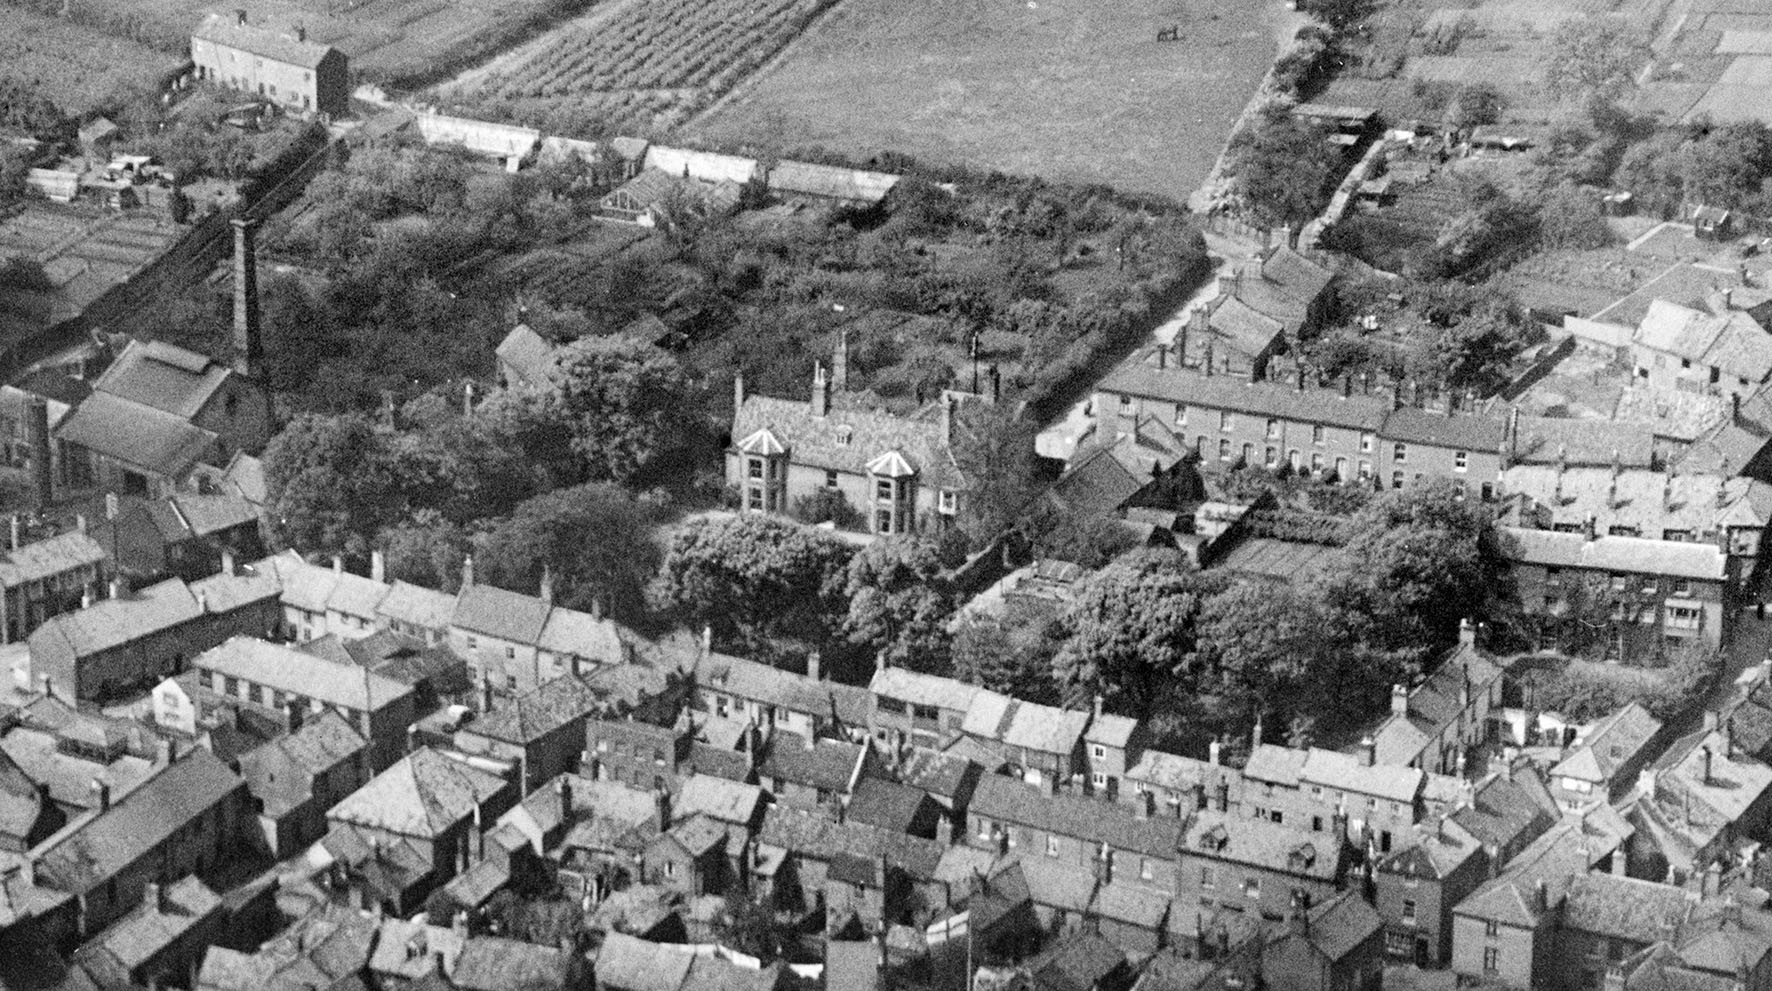 A black and white images shows the centre of North Walsham. Focused on a grand house, it also shows tightly packed streets of houses around it and fields to the north.